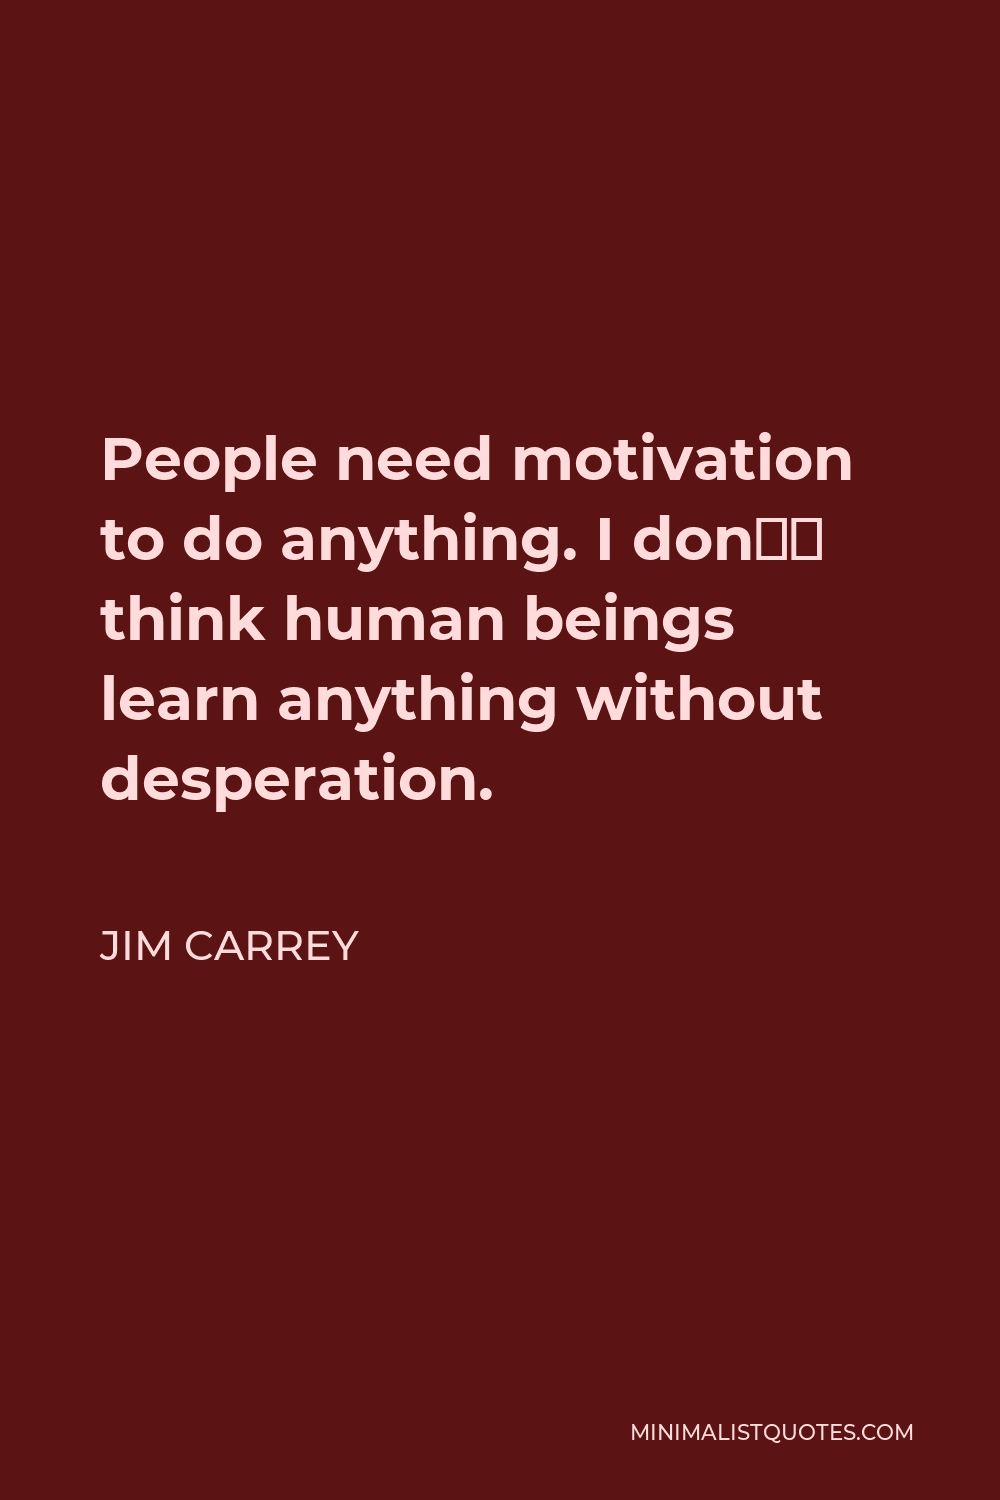 Jim Carrey Quote - People need motivation to do anything. I don’t think human beings learn anything without desperation.